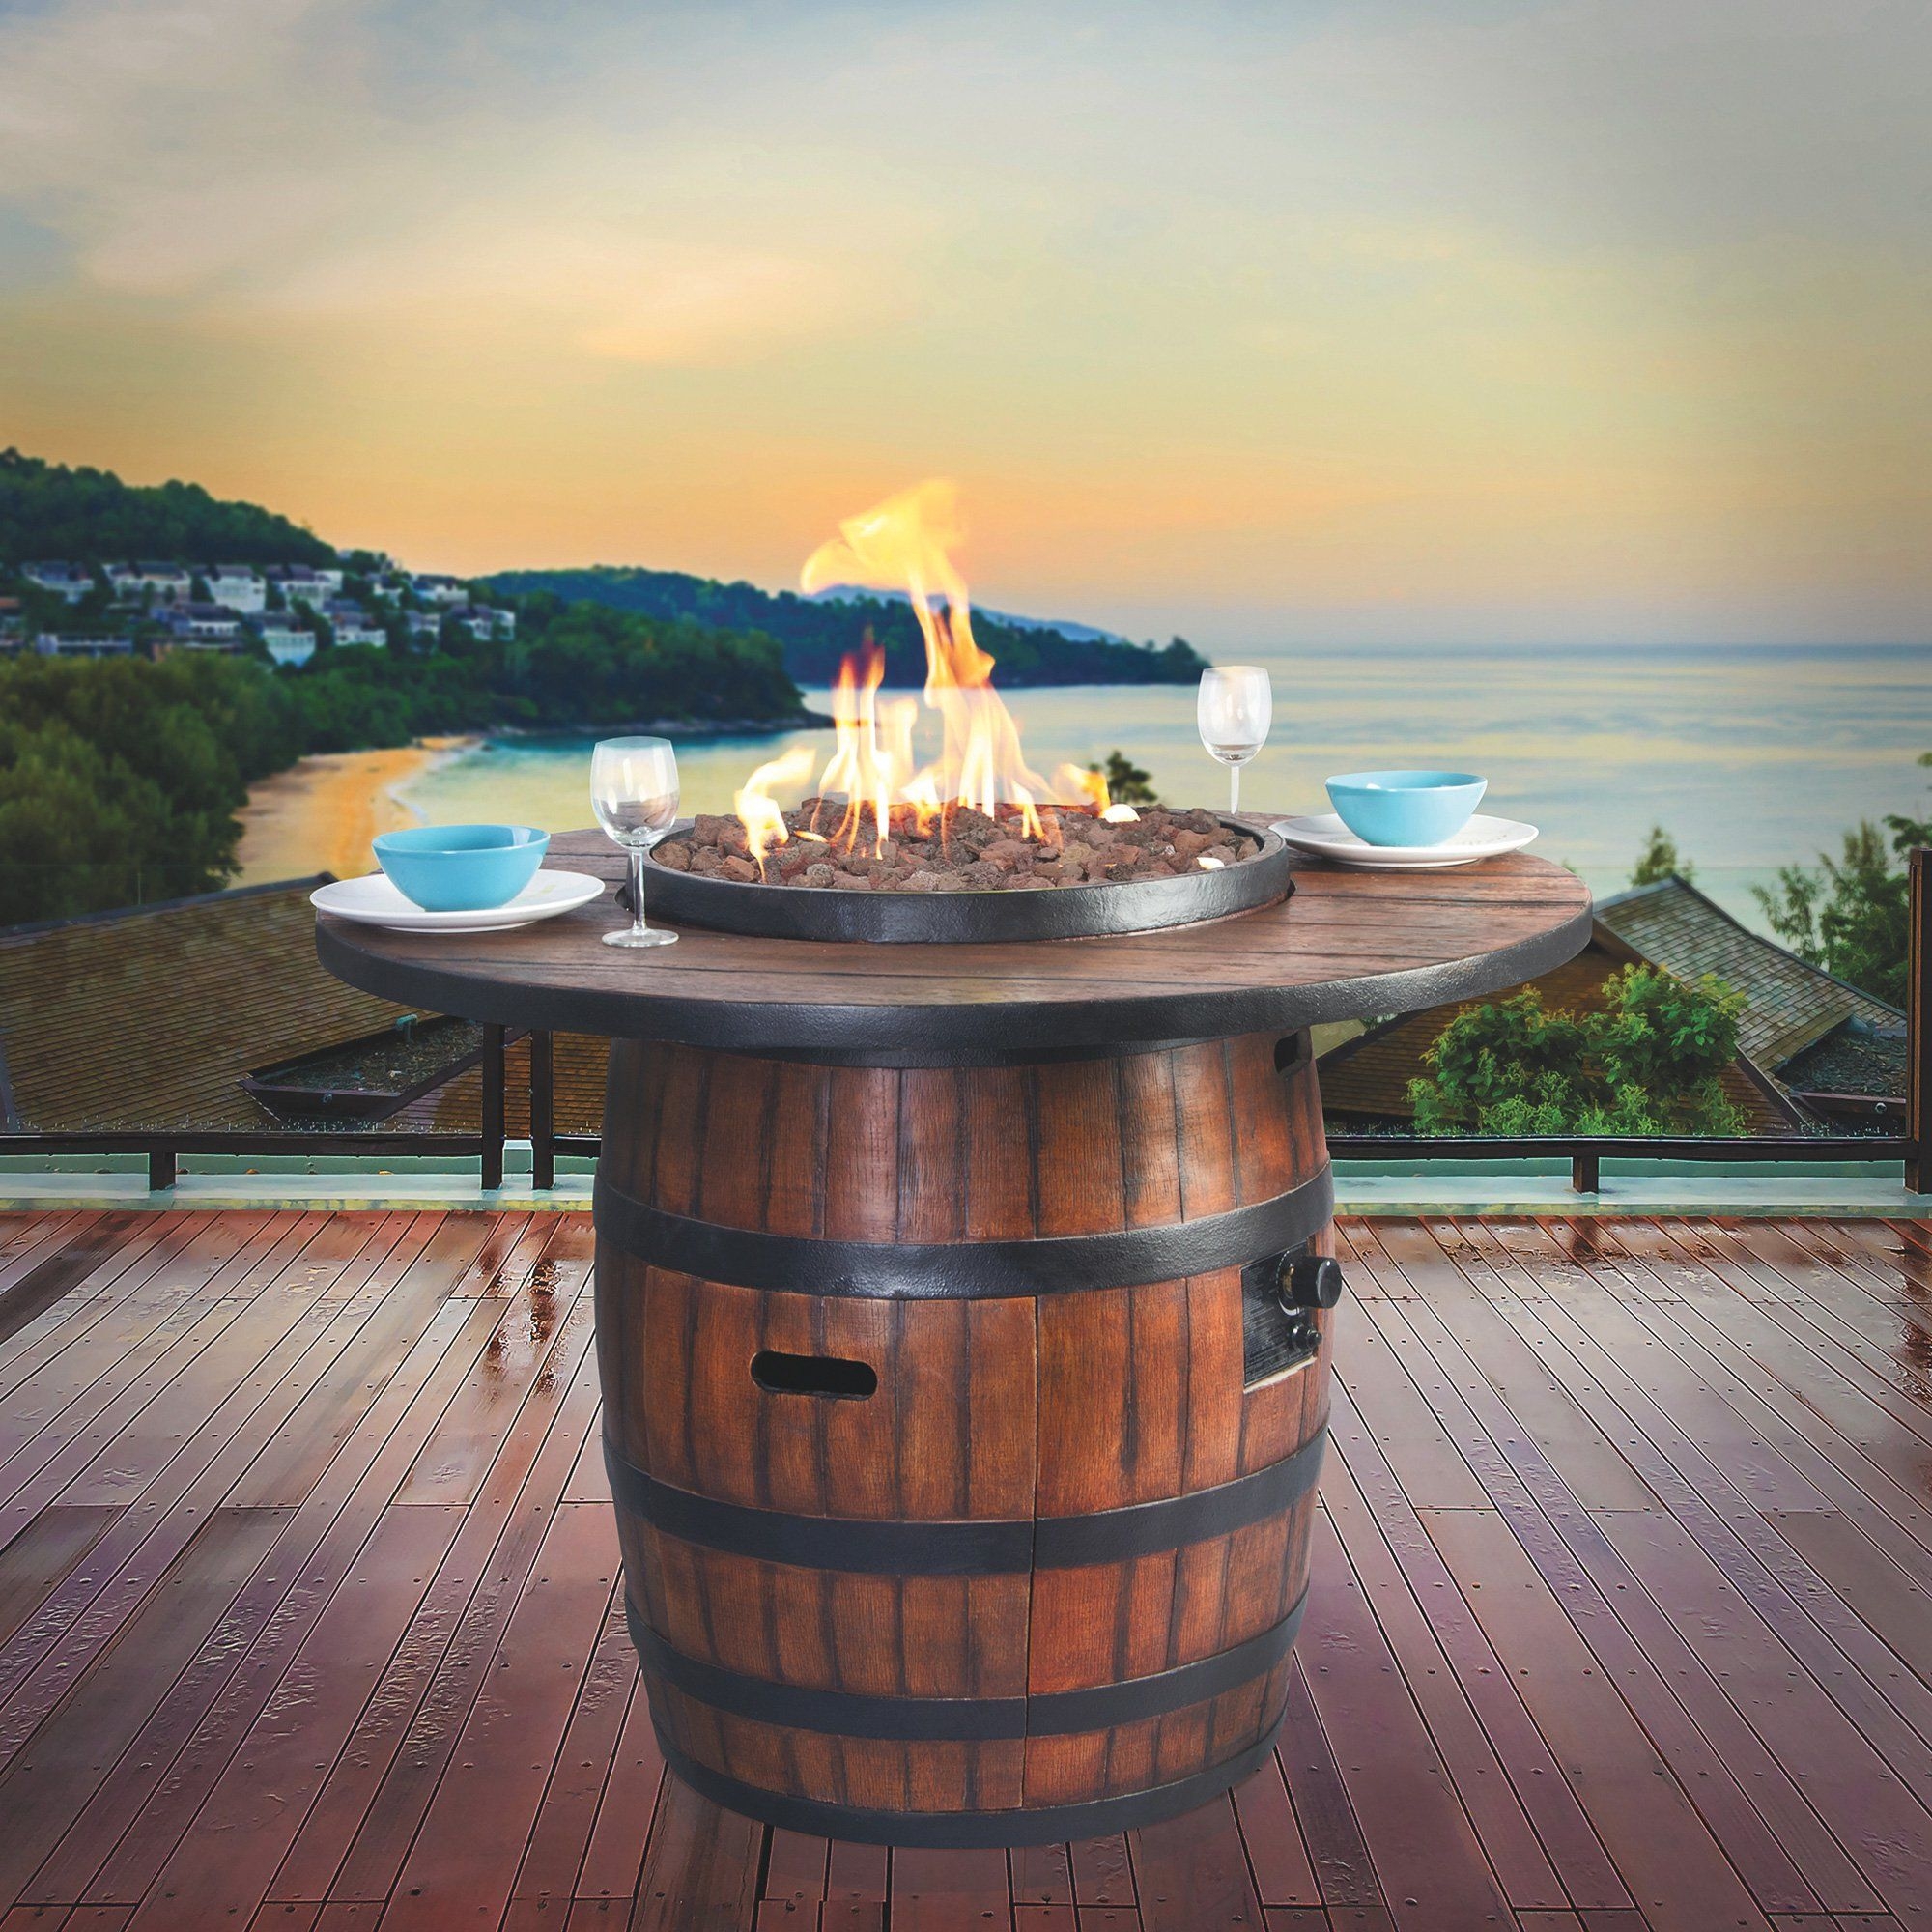 Wine Barrel Table Visualhunt, How To Make A Wine Barrel Fire Pit